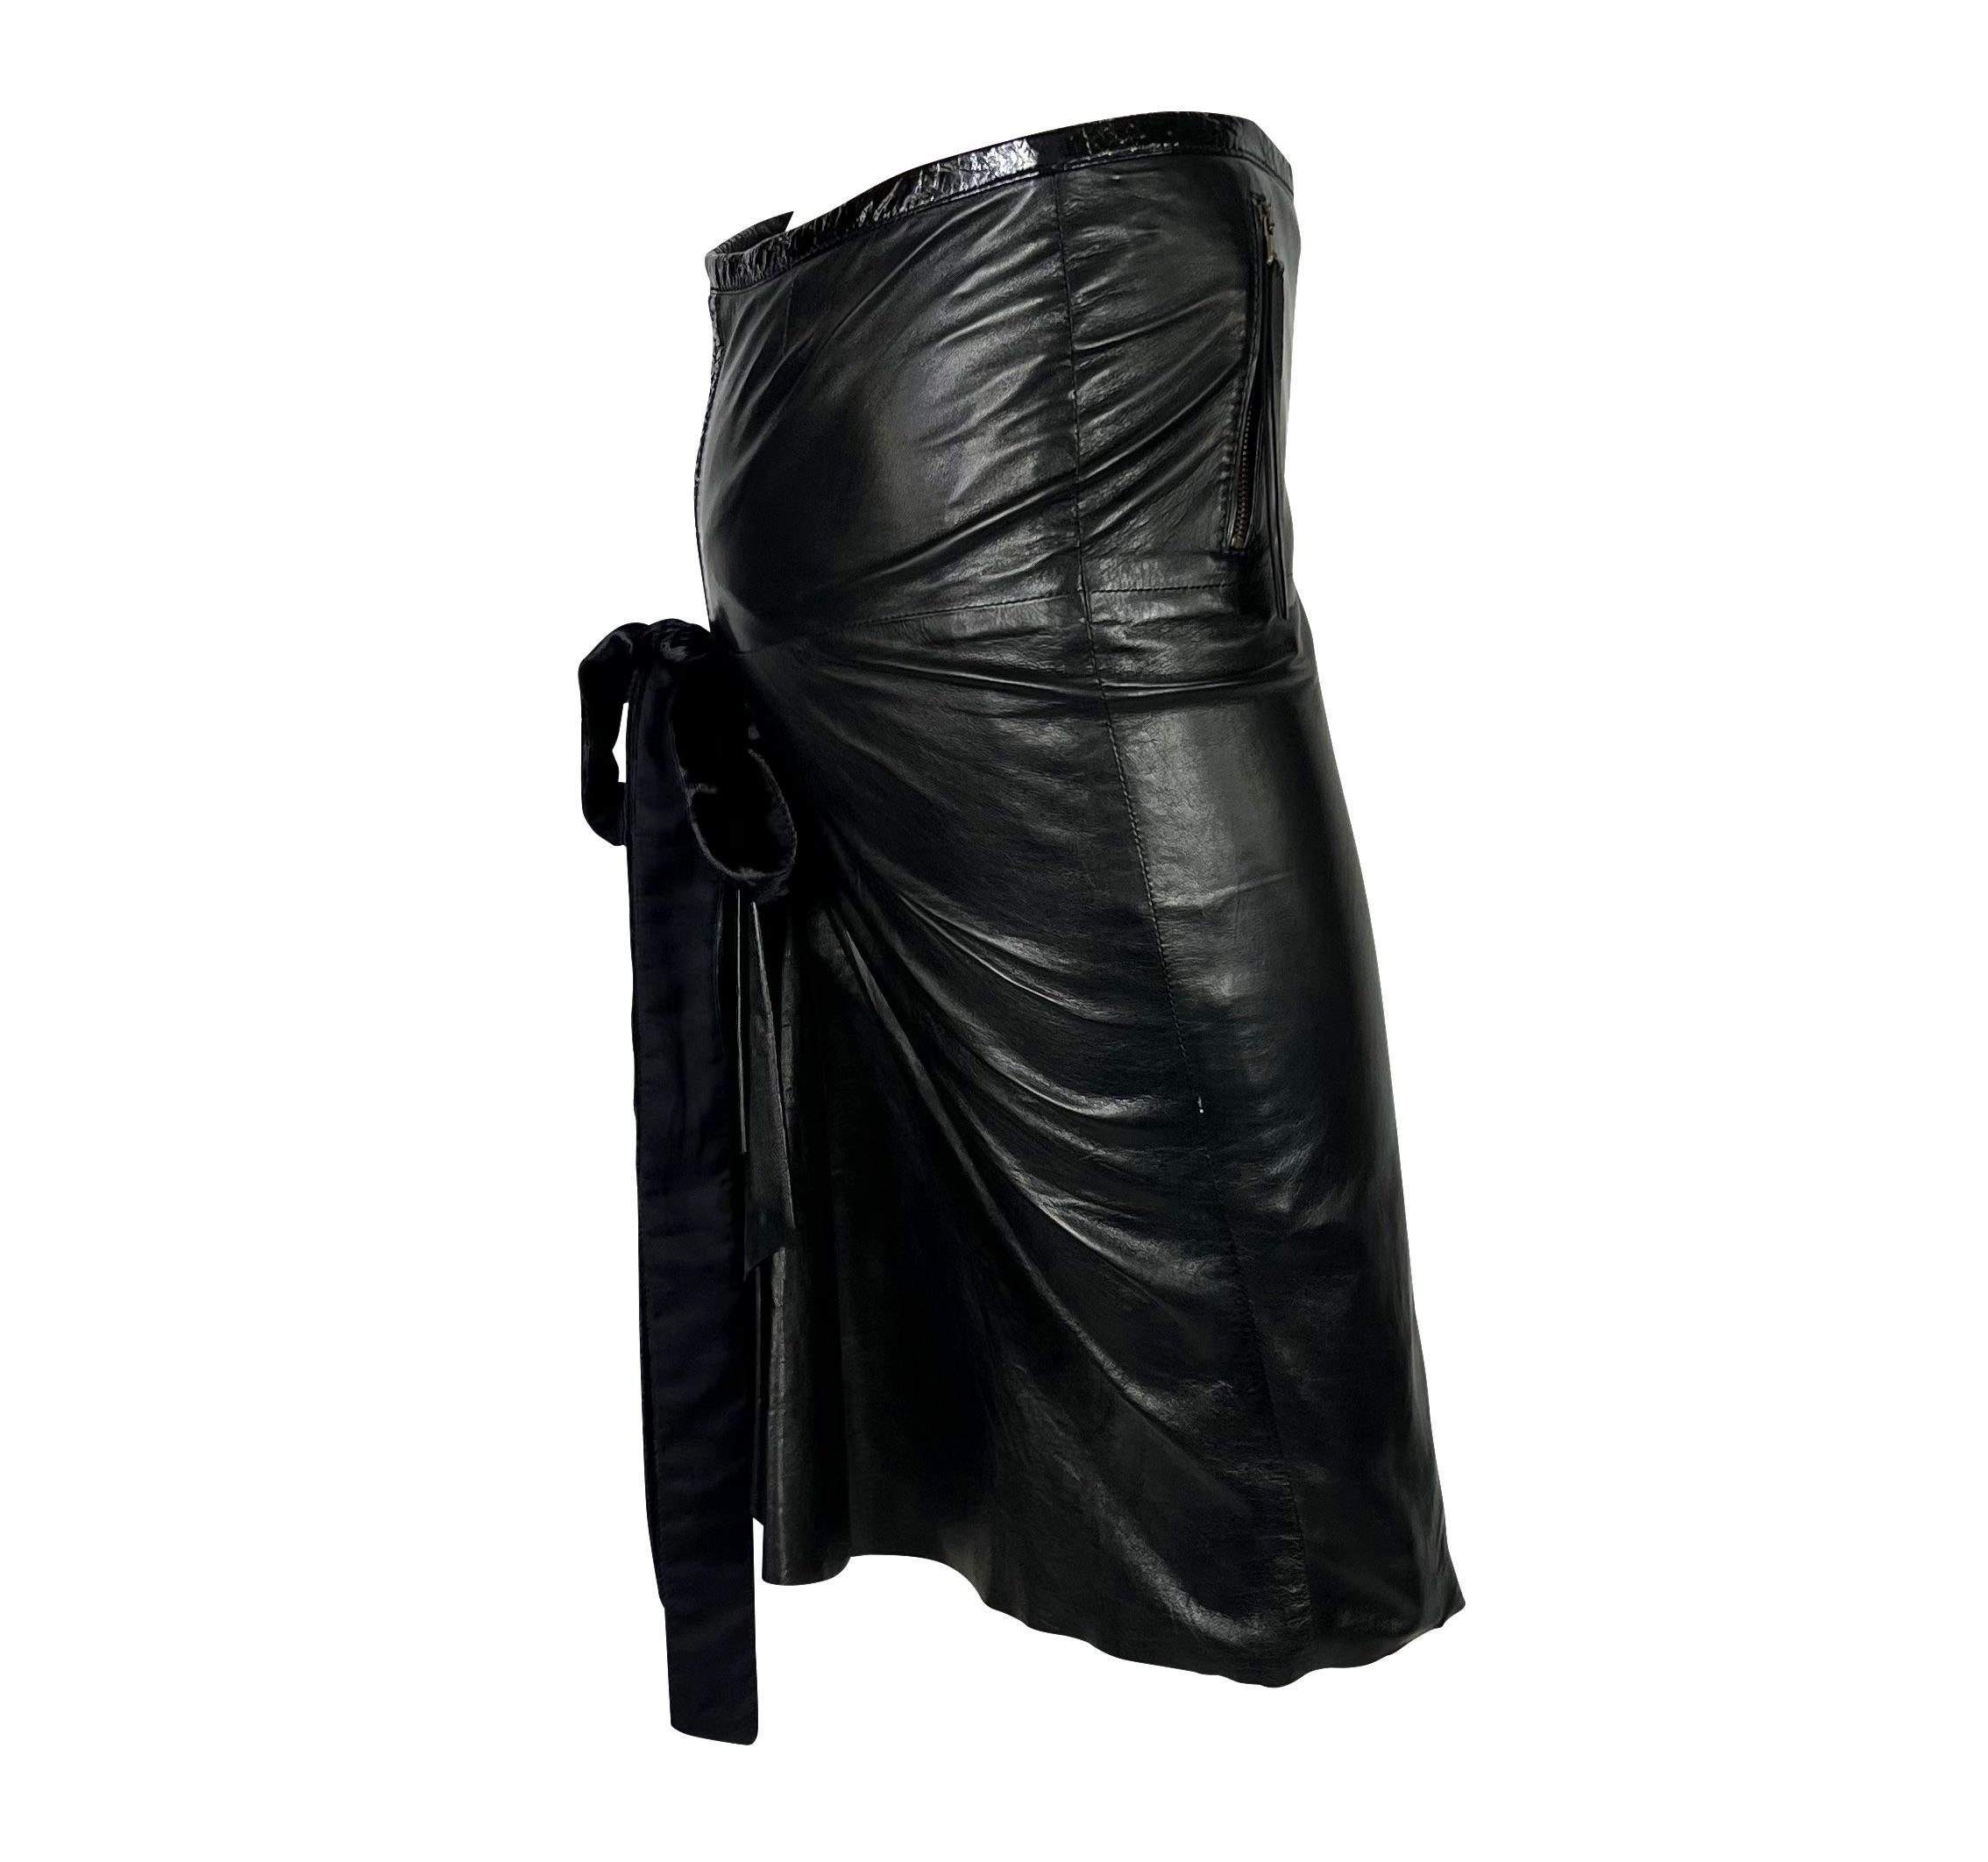 Presenting a black leather Roberto Cavalli pleated skirt. From the 2000s, this entirely leather skirt features a patent leather waistband, zipper pockets at the front, and ruching at the back. This skirt is made complete with a velvet bow that